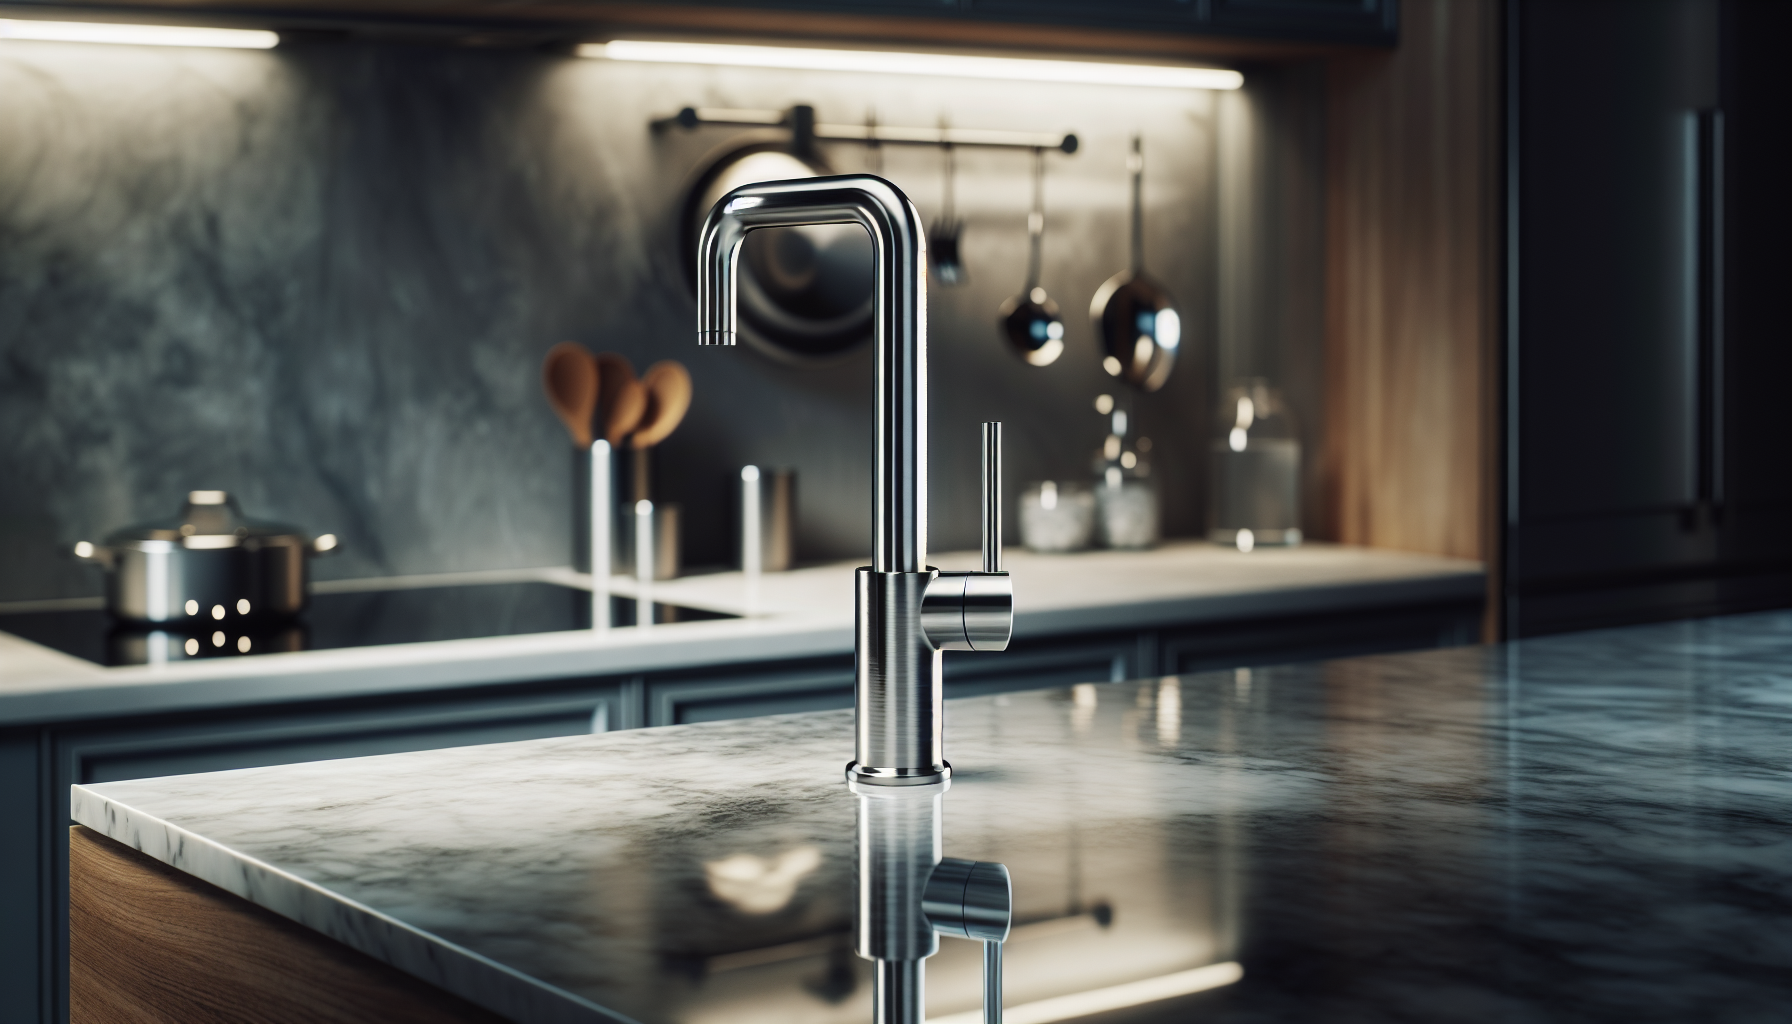 A stylish sparkling water tap in a modern kitchen setting